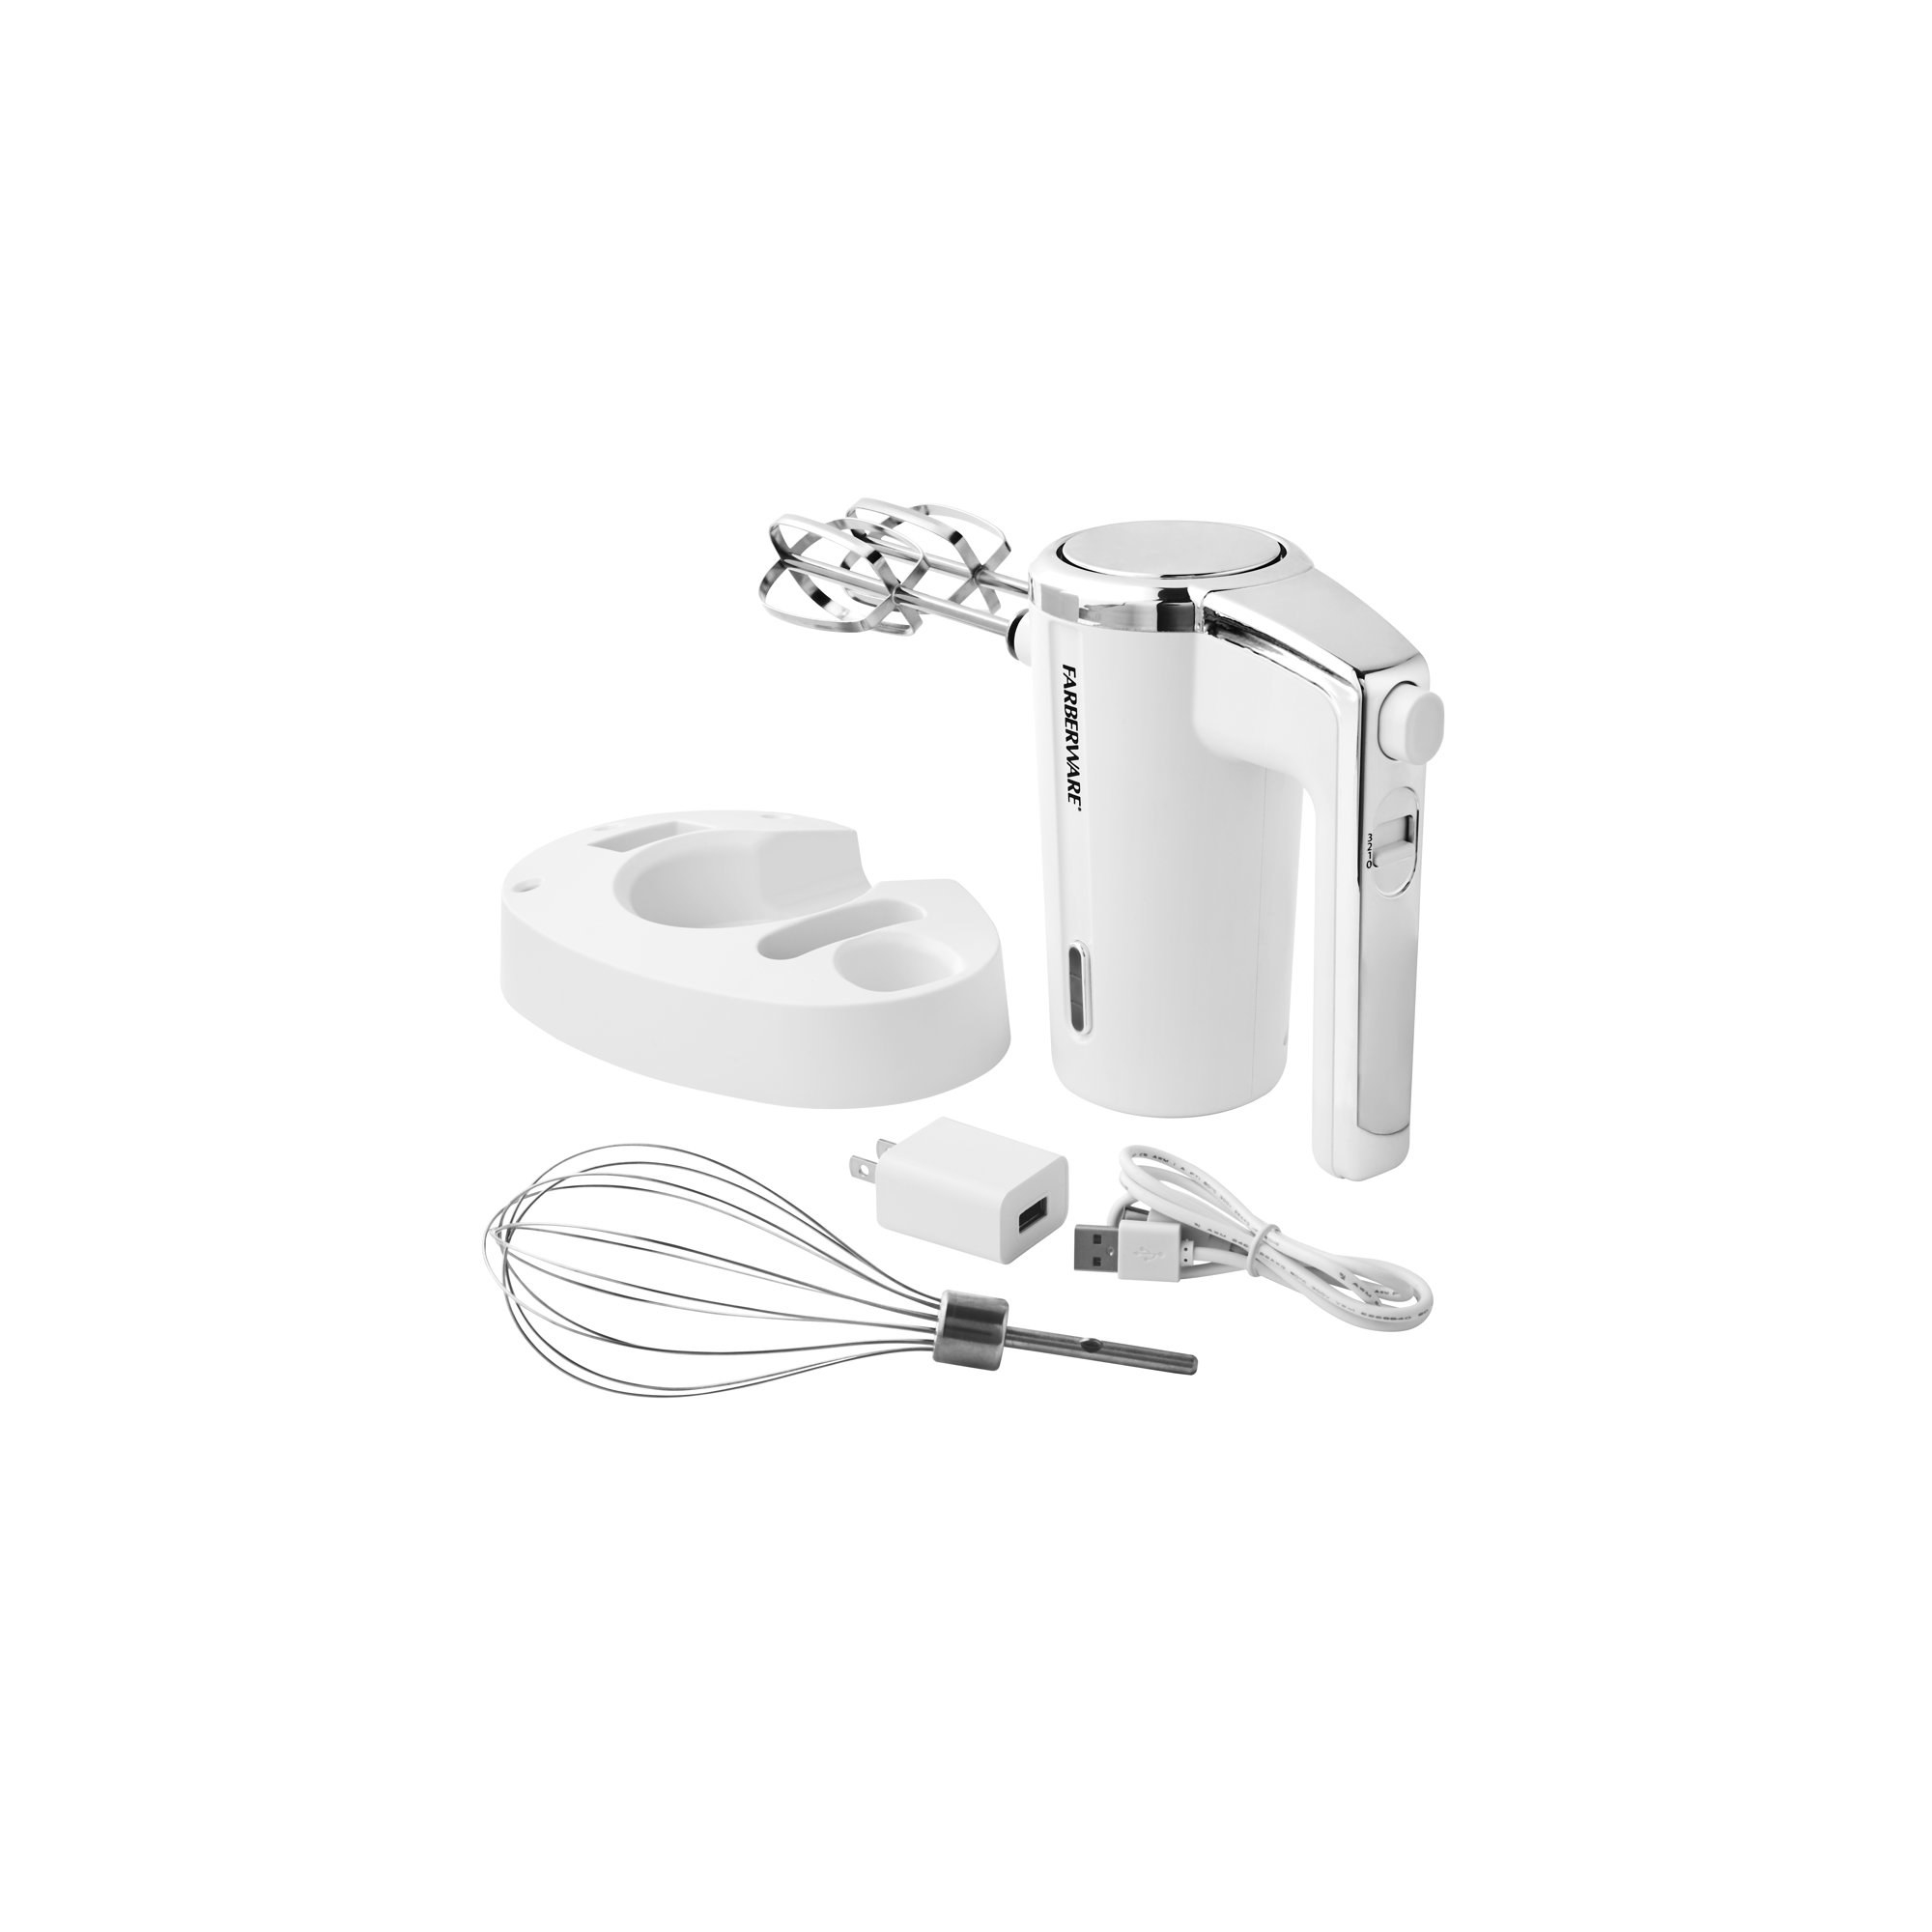 Product shot of a hand mixer and its attachments and minimal equipment